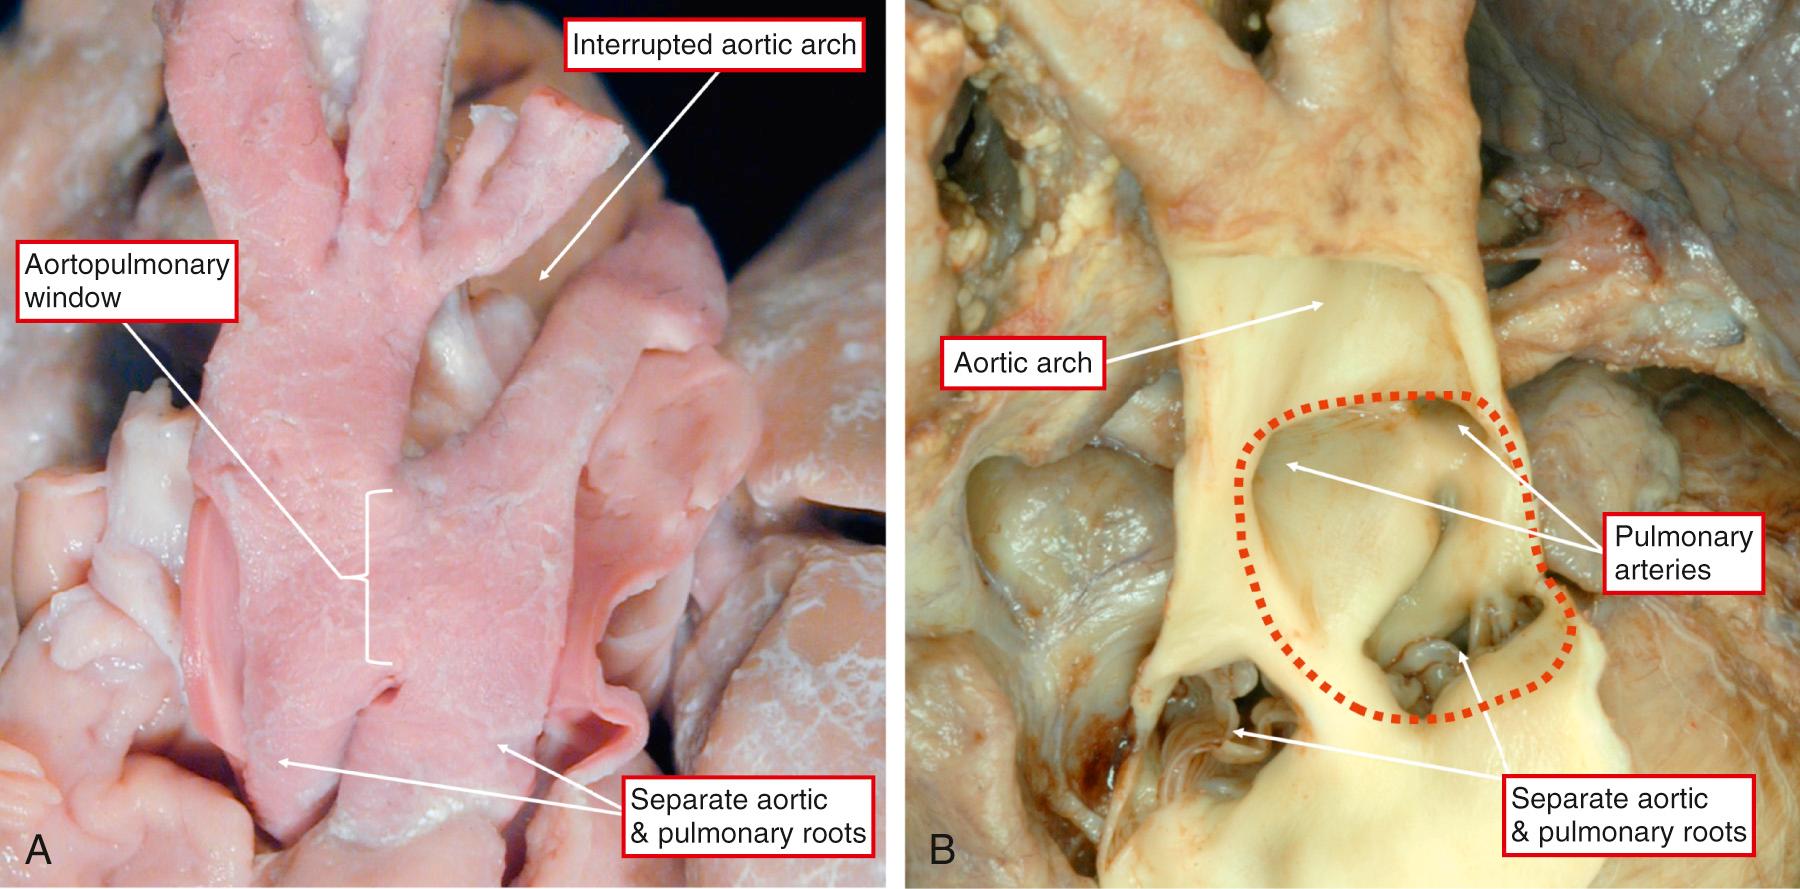 Fig. 51.6, Features of aortopulmonary windows. (A) Example in the setting of interruption of the aortic arch at the isthmus, with the arterial duct supplying the distal circulation from the pulmonary trunk. The arterial trunks are photographed from the front. (B) A large defect (dashed line) viewed subsequent to opening the aorta. Note the presence of the separate aortic and pulmonary roots.